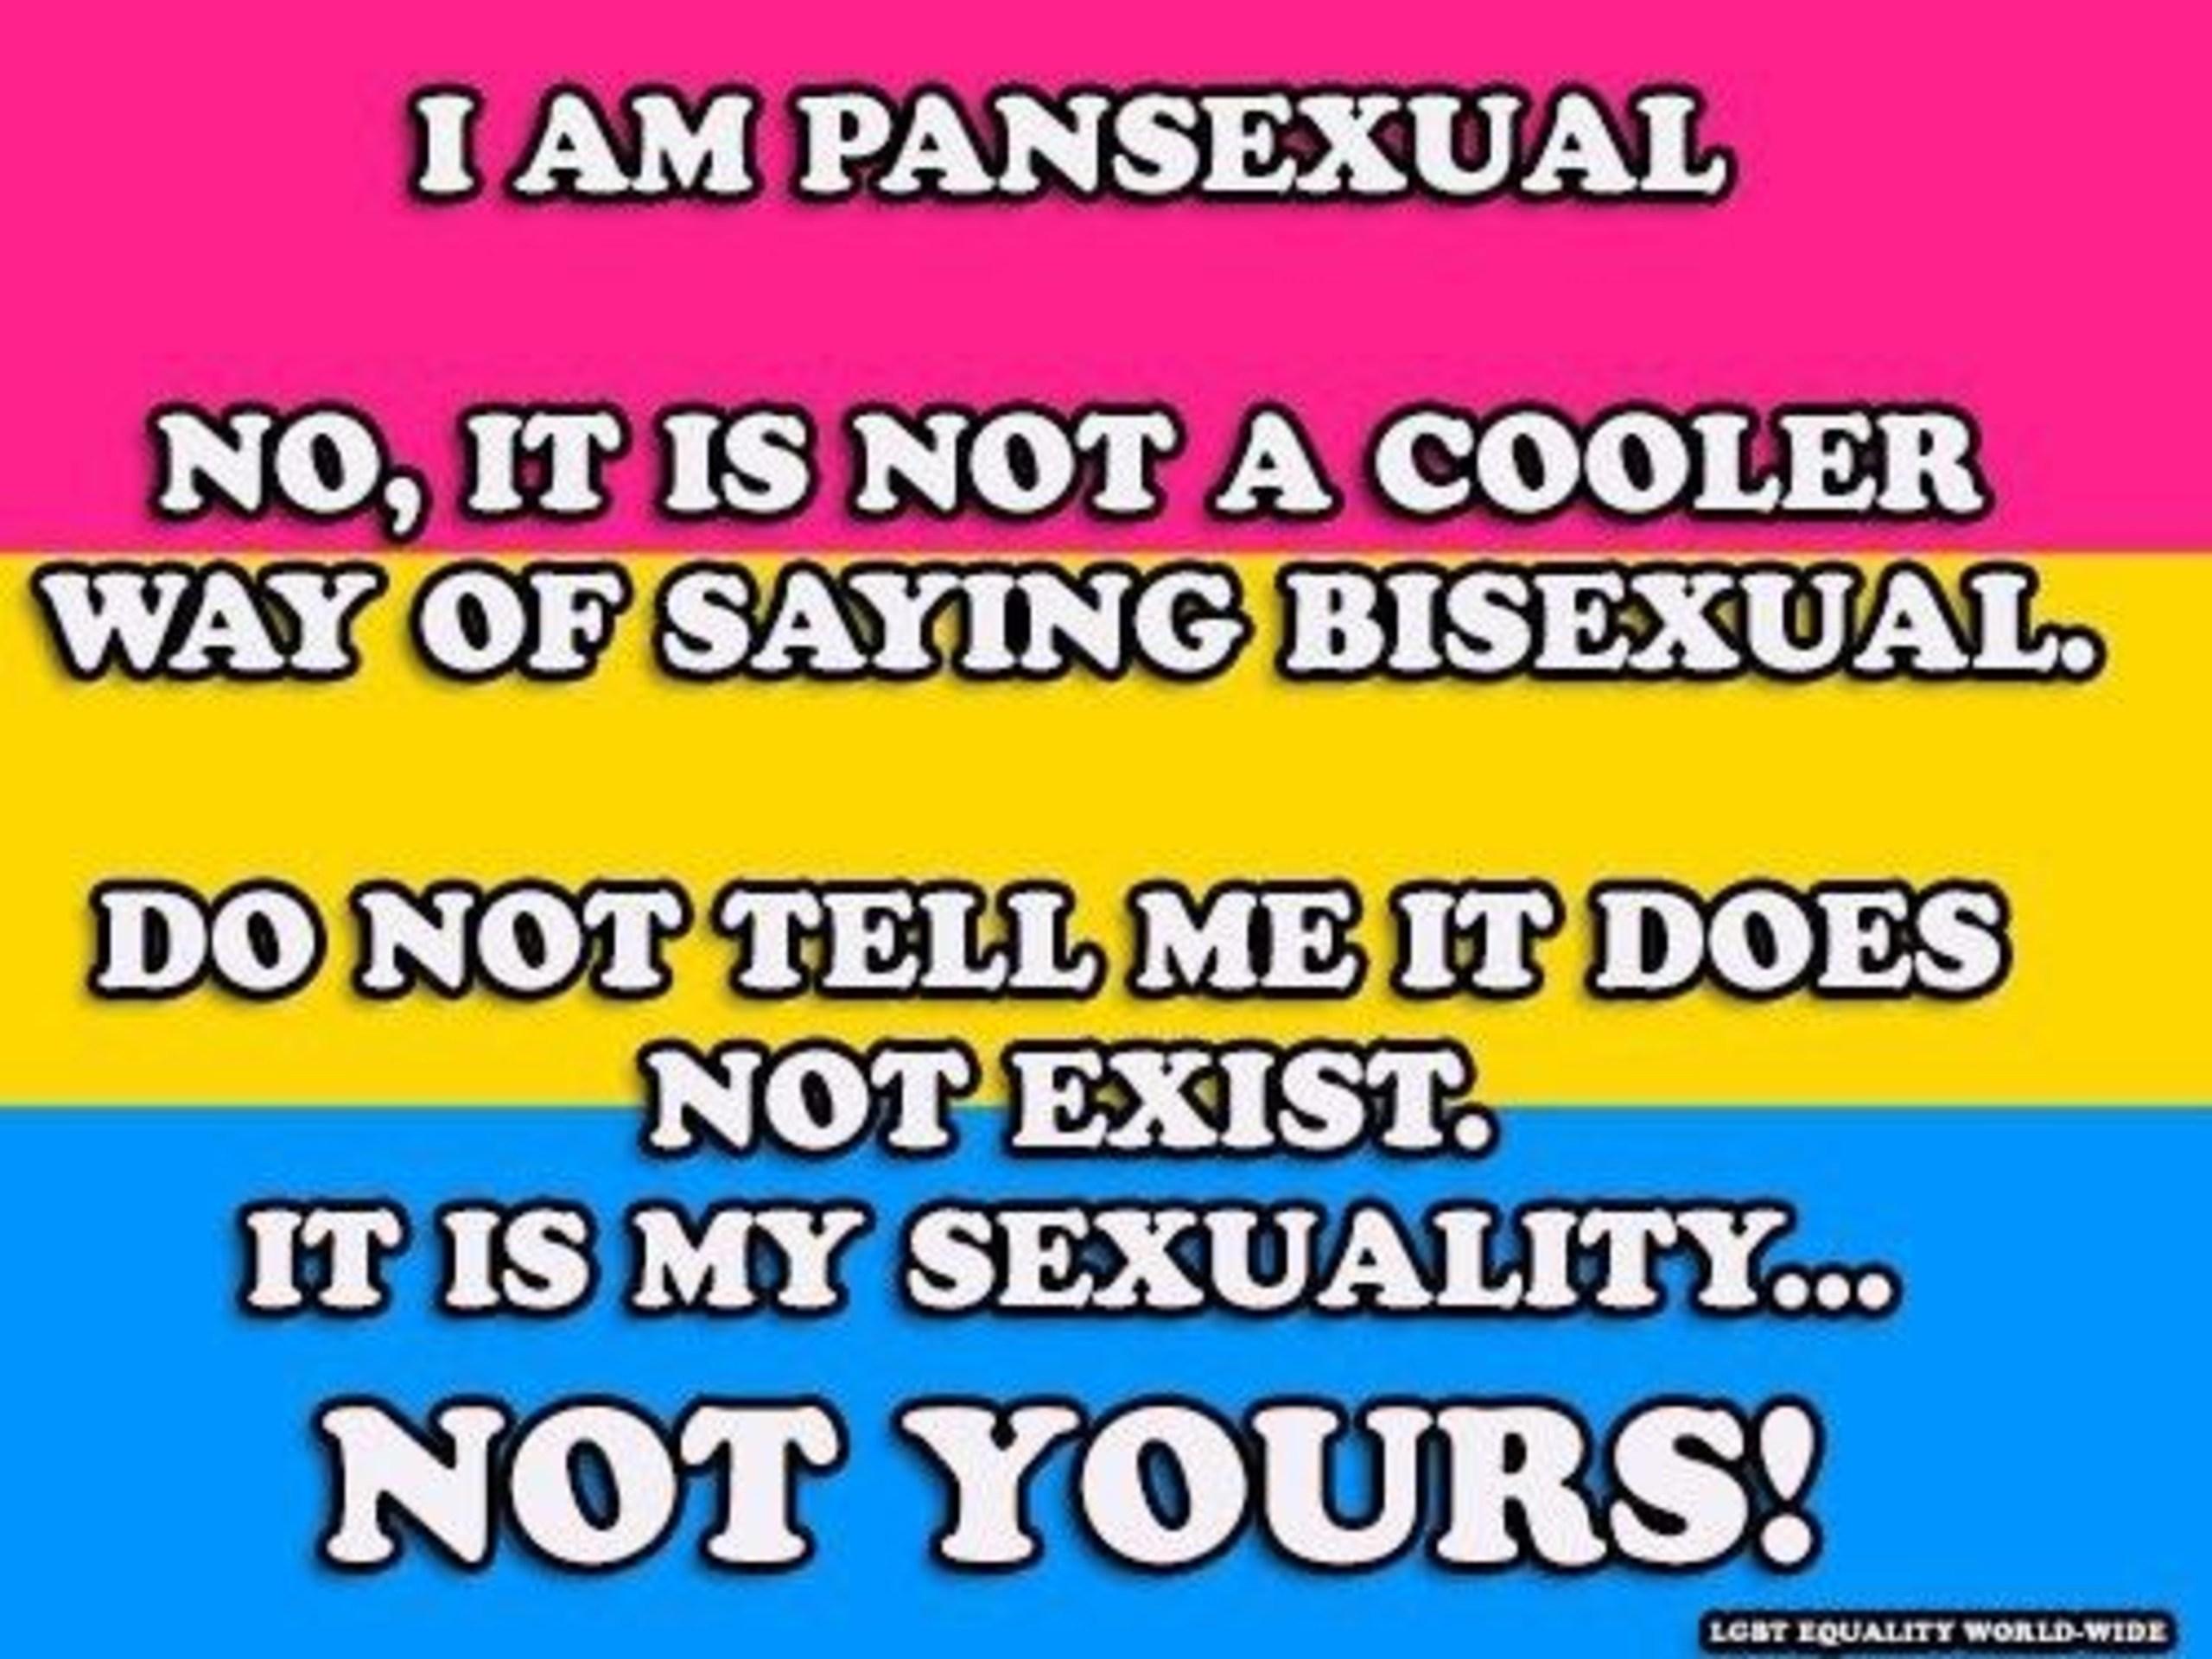 pansexual <3 ASK QUESTIONS, ignorance doesn't get us